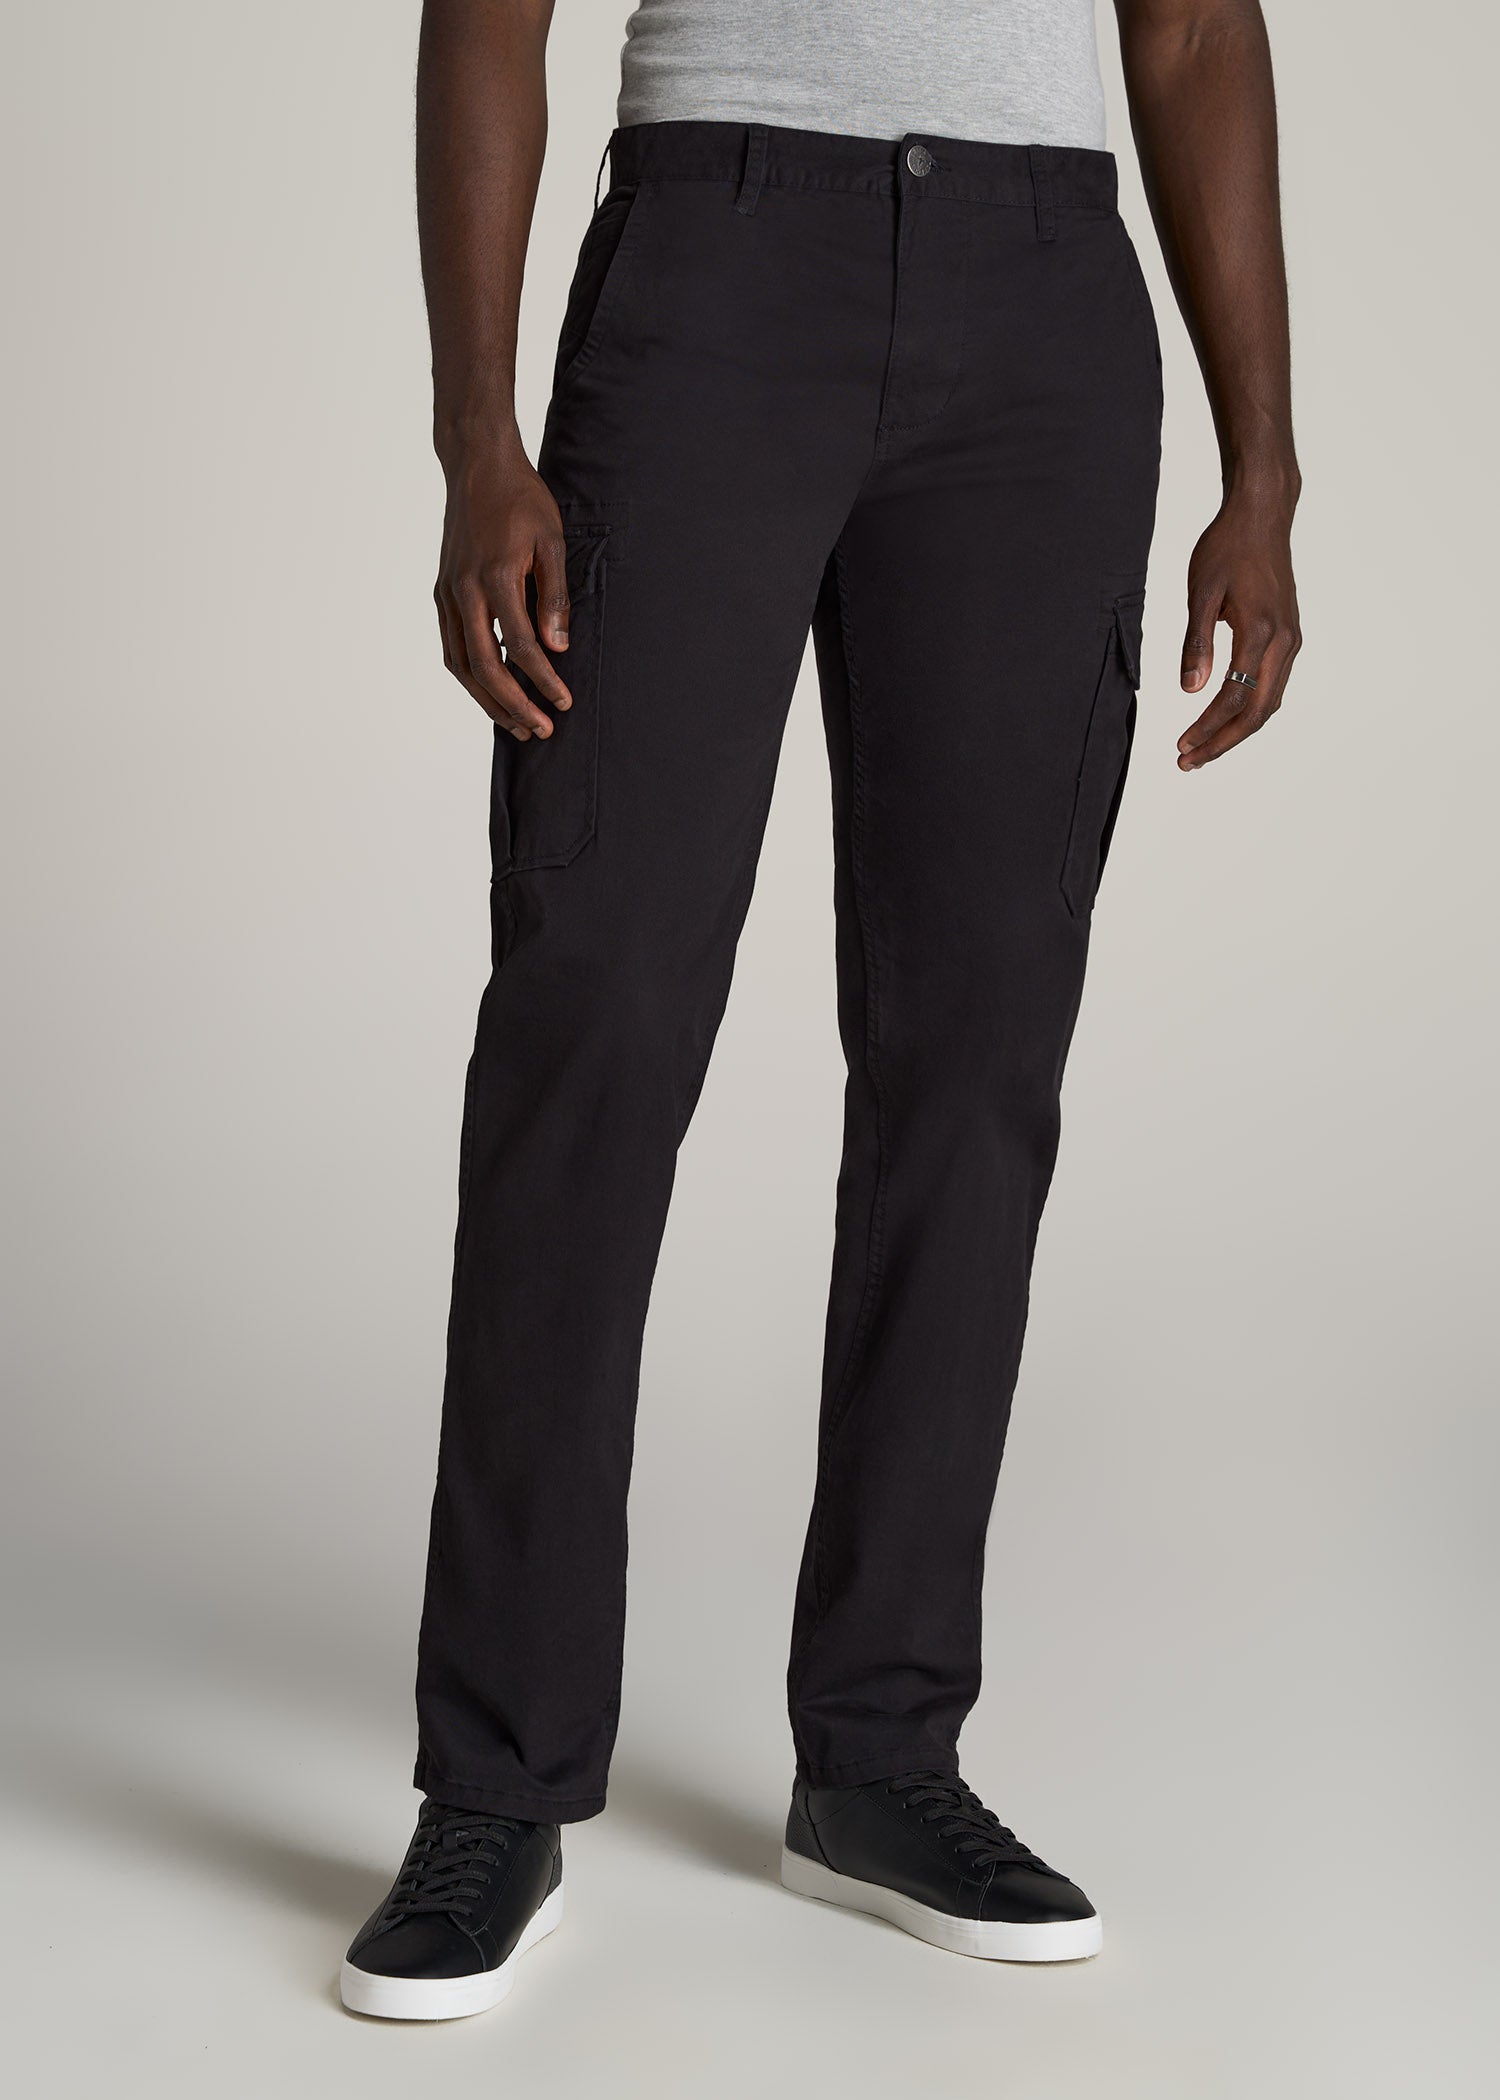 Stretch Twill SLIM-FIT Cargo Pants for Tall Men in Black